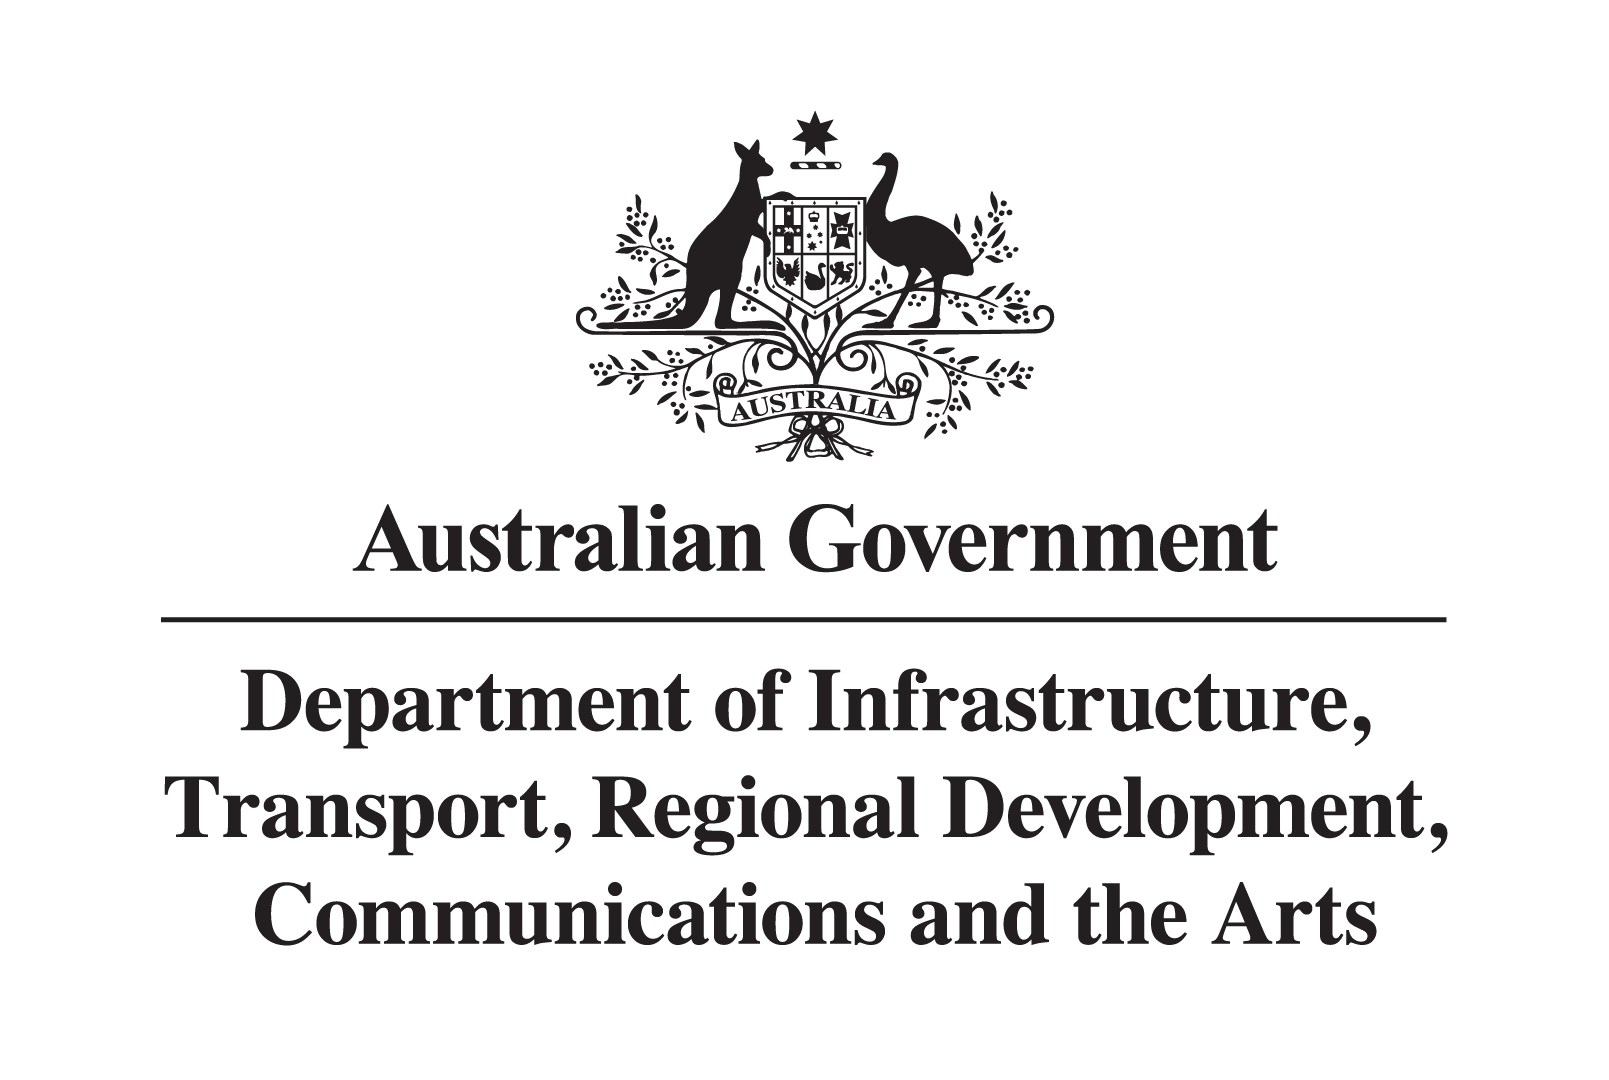 Australian Government Department of Infrastructure, Transport, Regional Development and Communications